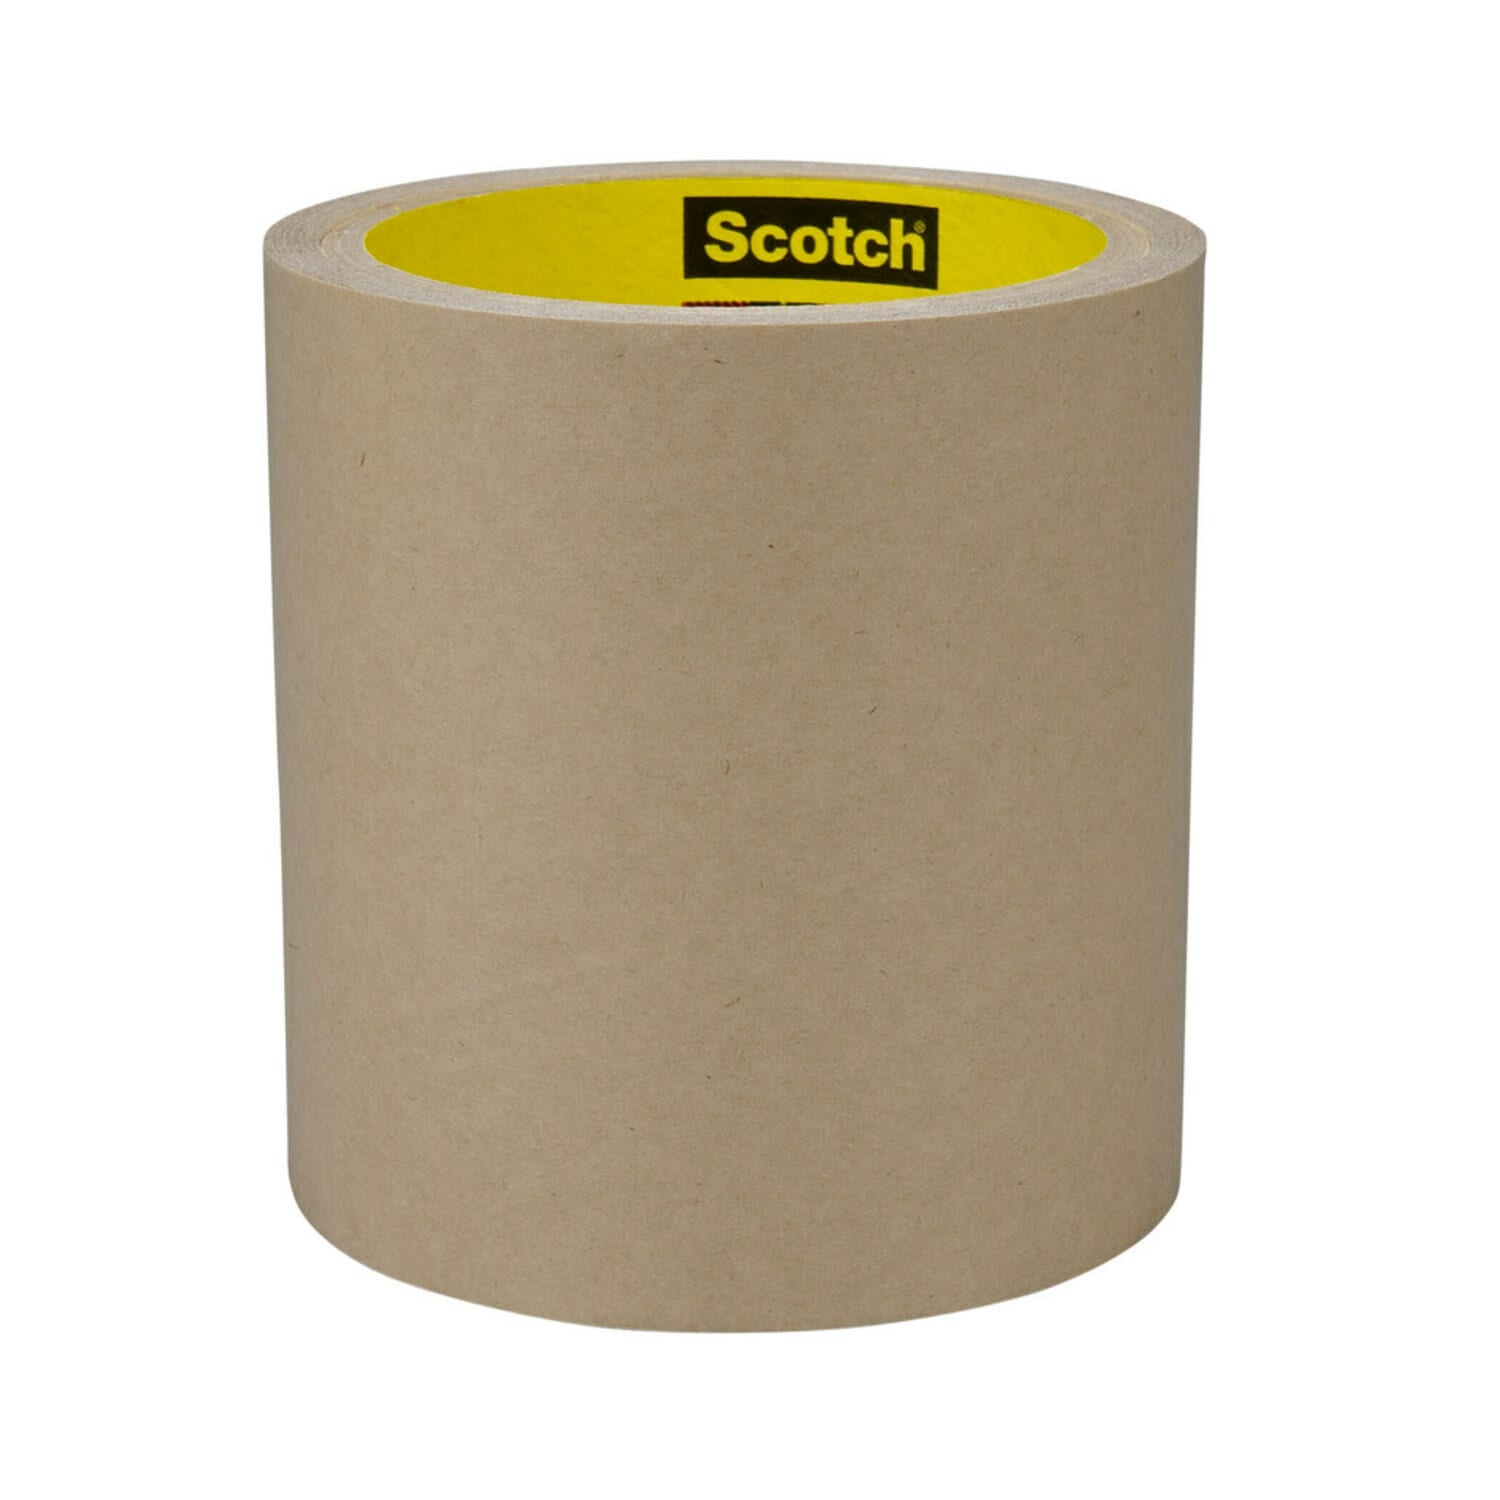 7100023461 - 3M Adhesive Transfer Tape 9482PC, Clear, 24 in x 60 yd, 2 mil, 1 roll
per case